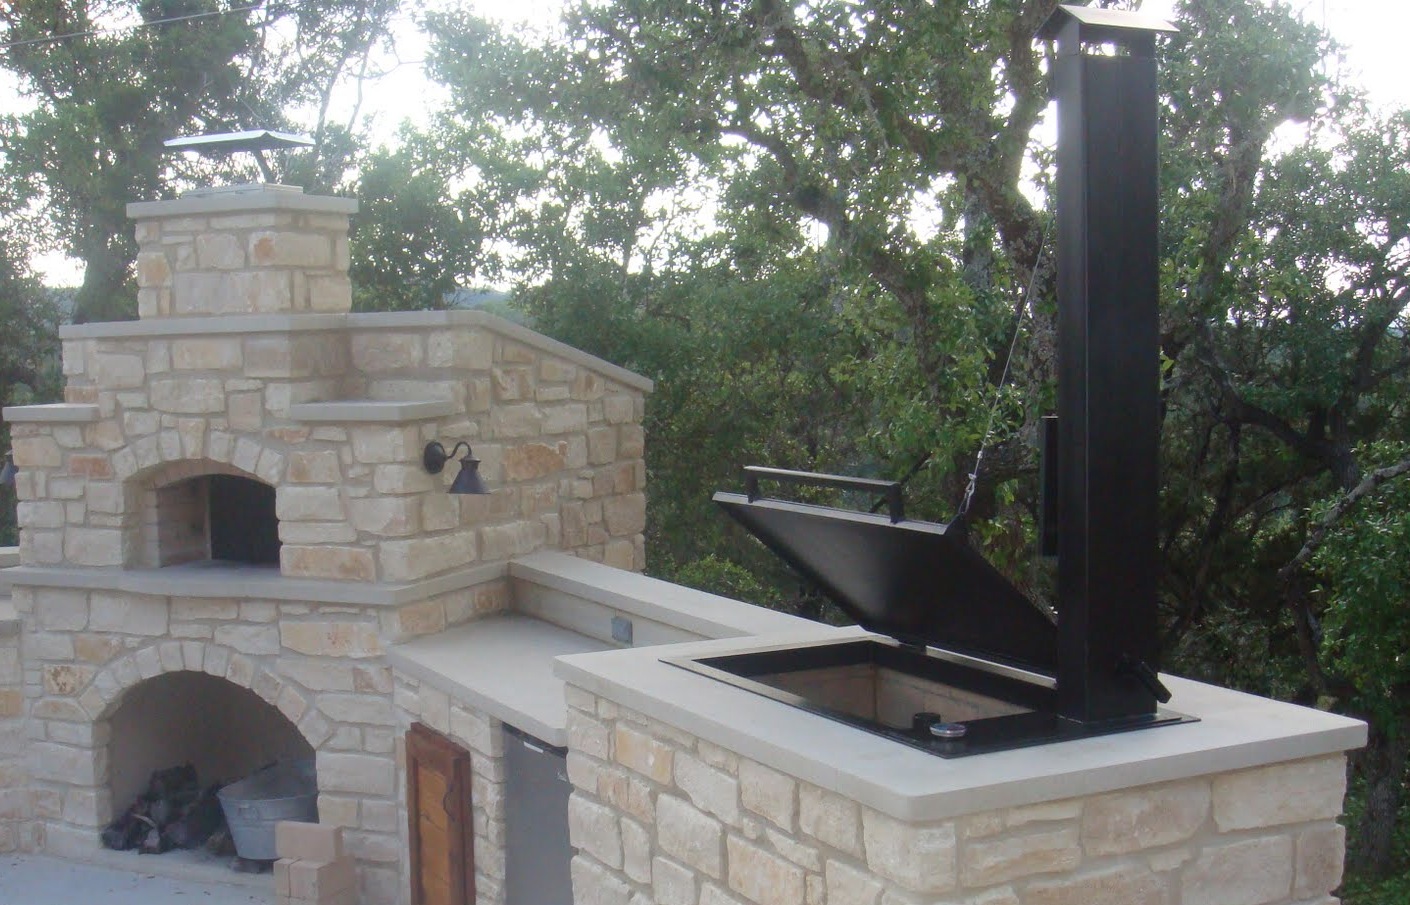 Wood Fired Pizza Oven, Outdoor Fireplace Pizza Oven Smoker